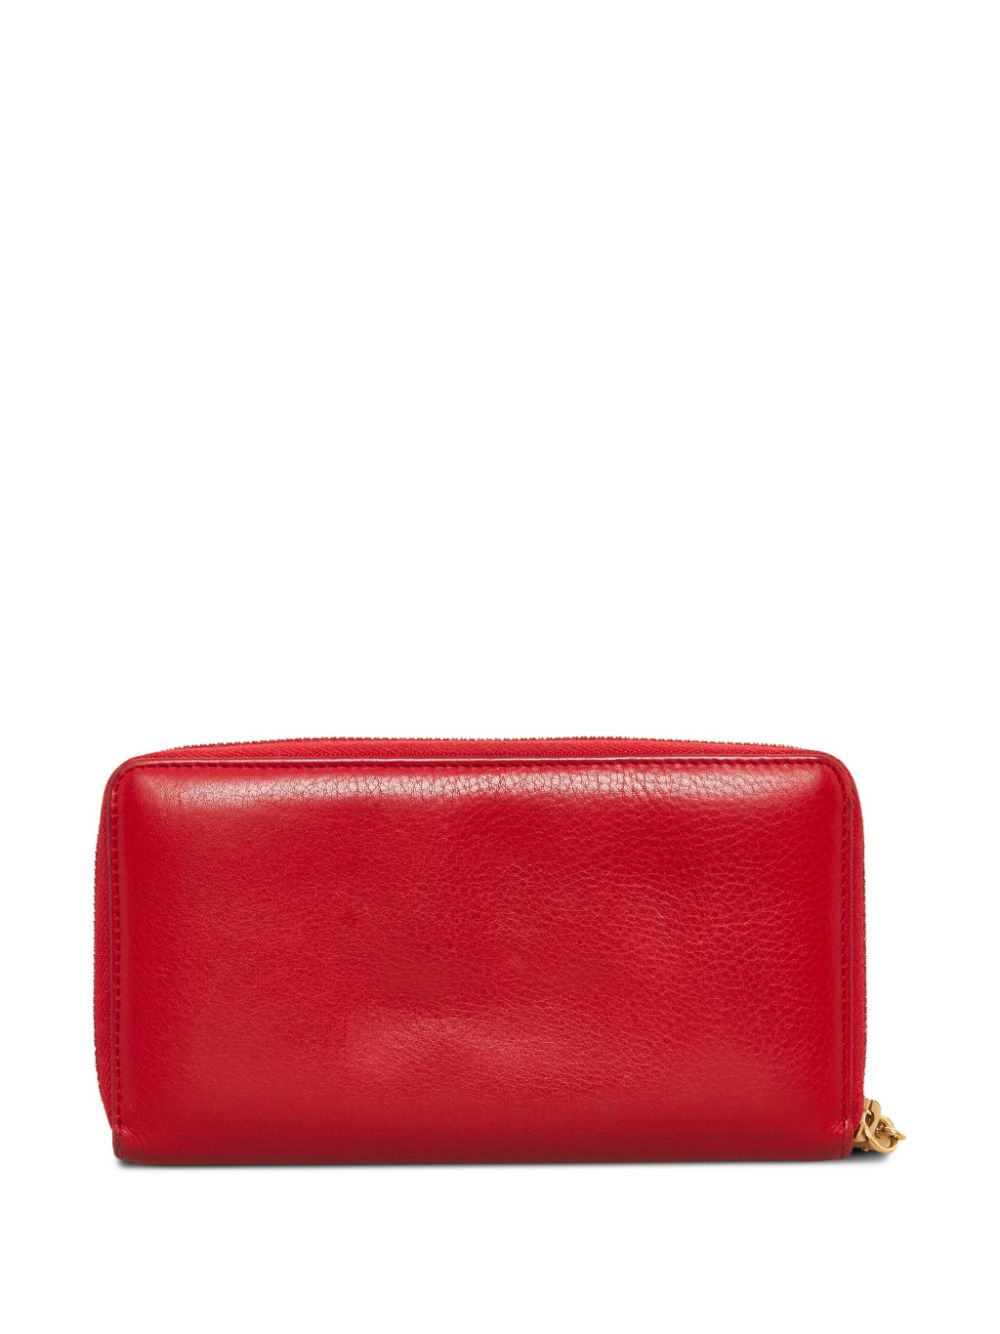 Gucci Pre-Owned Soho leather continental wallet - Rood